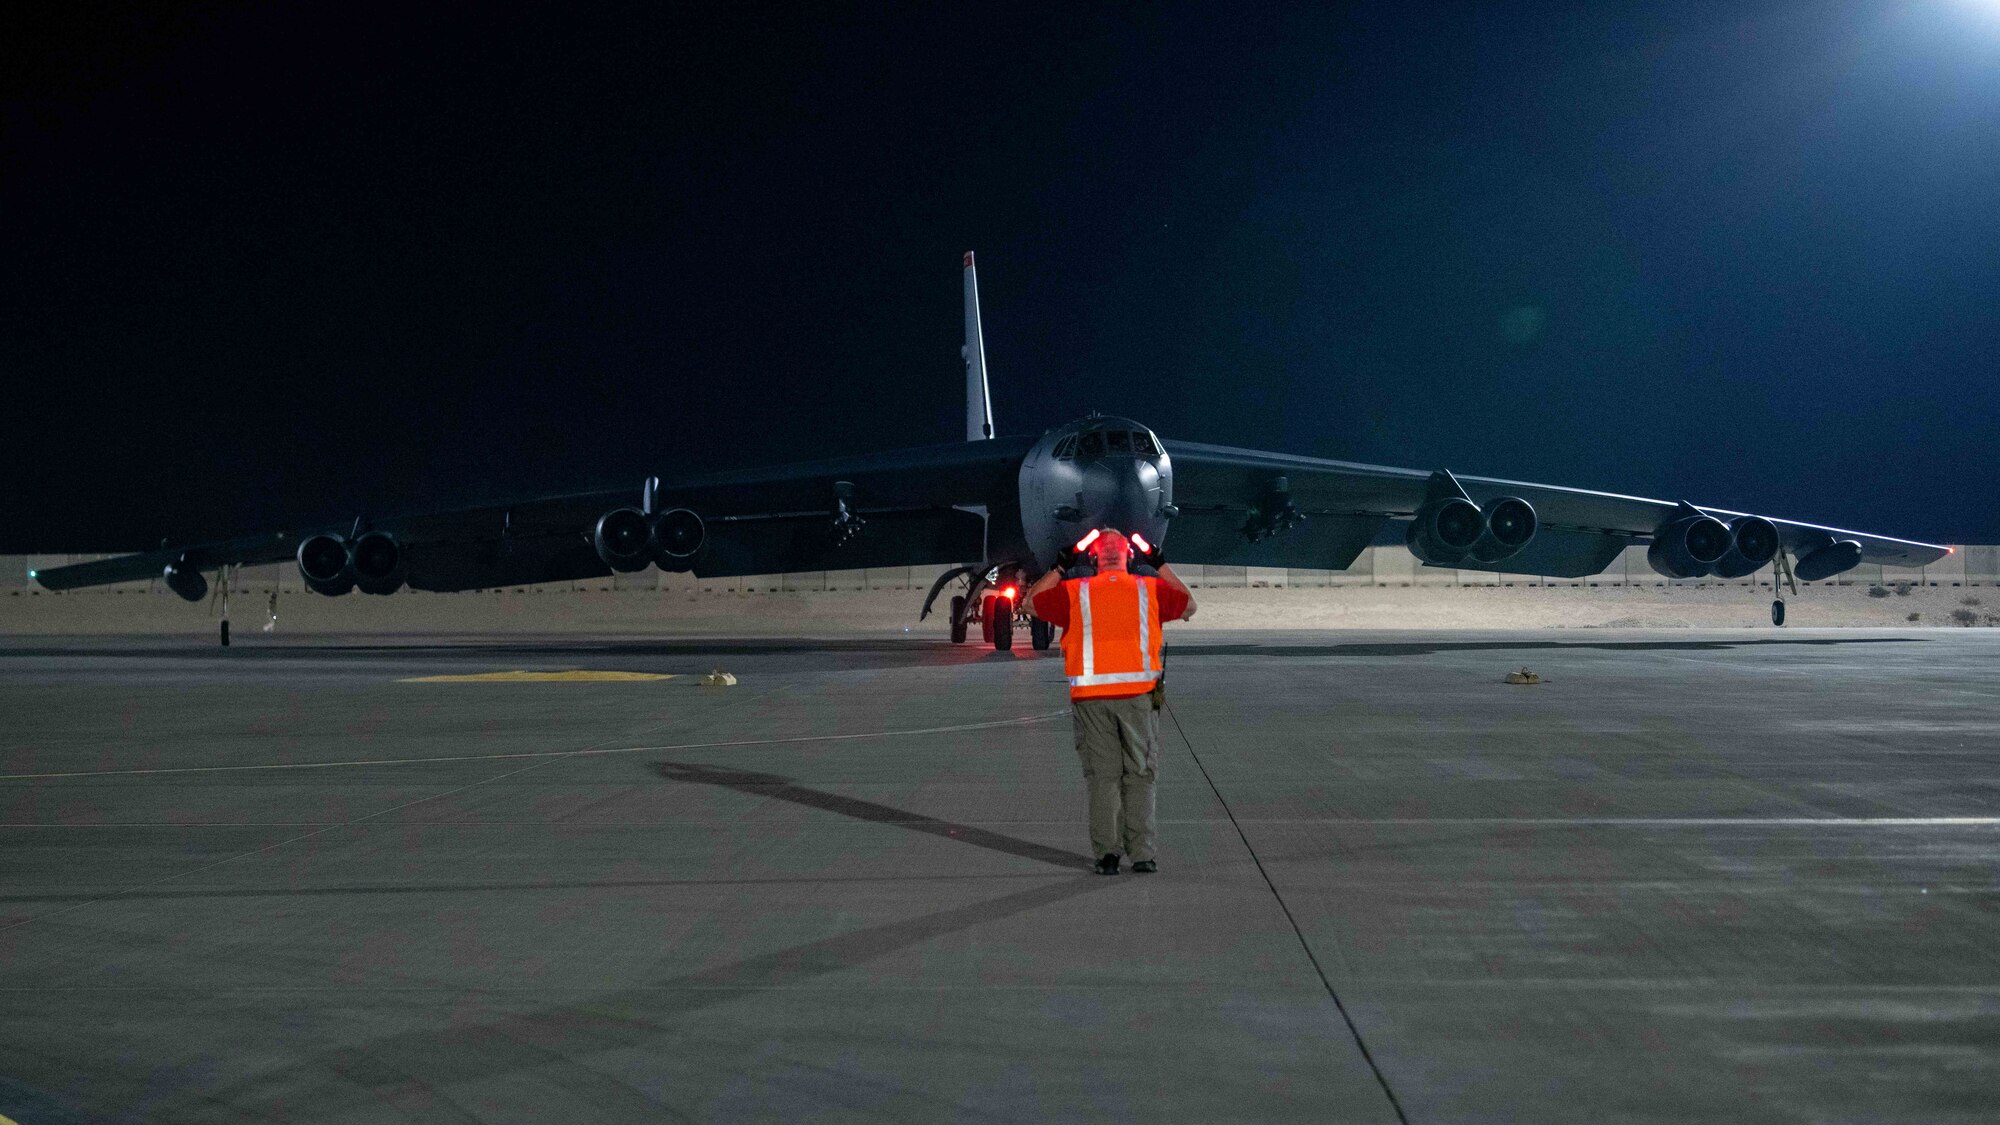 A B-52H Stratofortress assigned to the 5th Bomb Wing, Minot Air Force Base, N.D., taxis on the flightline April 23, 2021, at Al Udeid Air Base, Qatar. The B-52 aircraft are deployed to Al Udeid AB to protect U.S. and coalition forces as they conduct drawdown operations from Afghanistan. (U.S. Air Force photo by Staff Sgt. Greg Erwin)